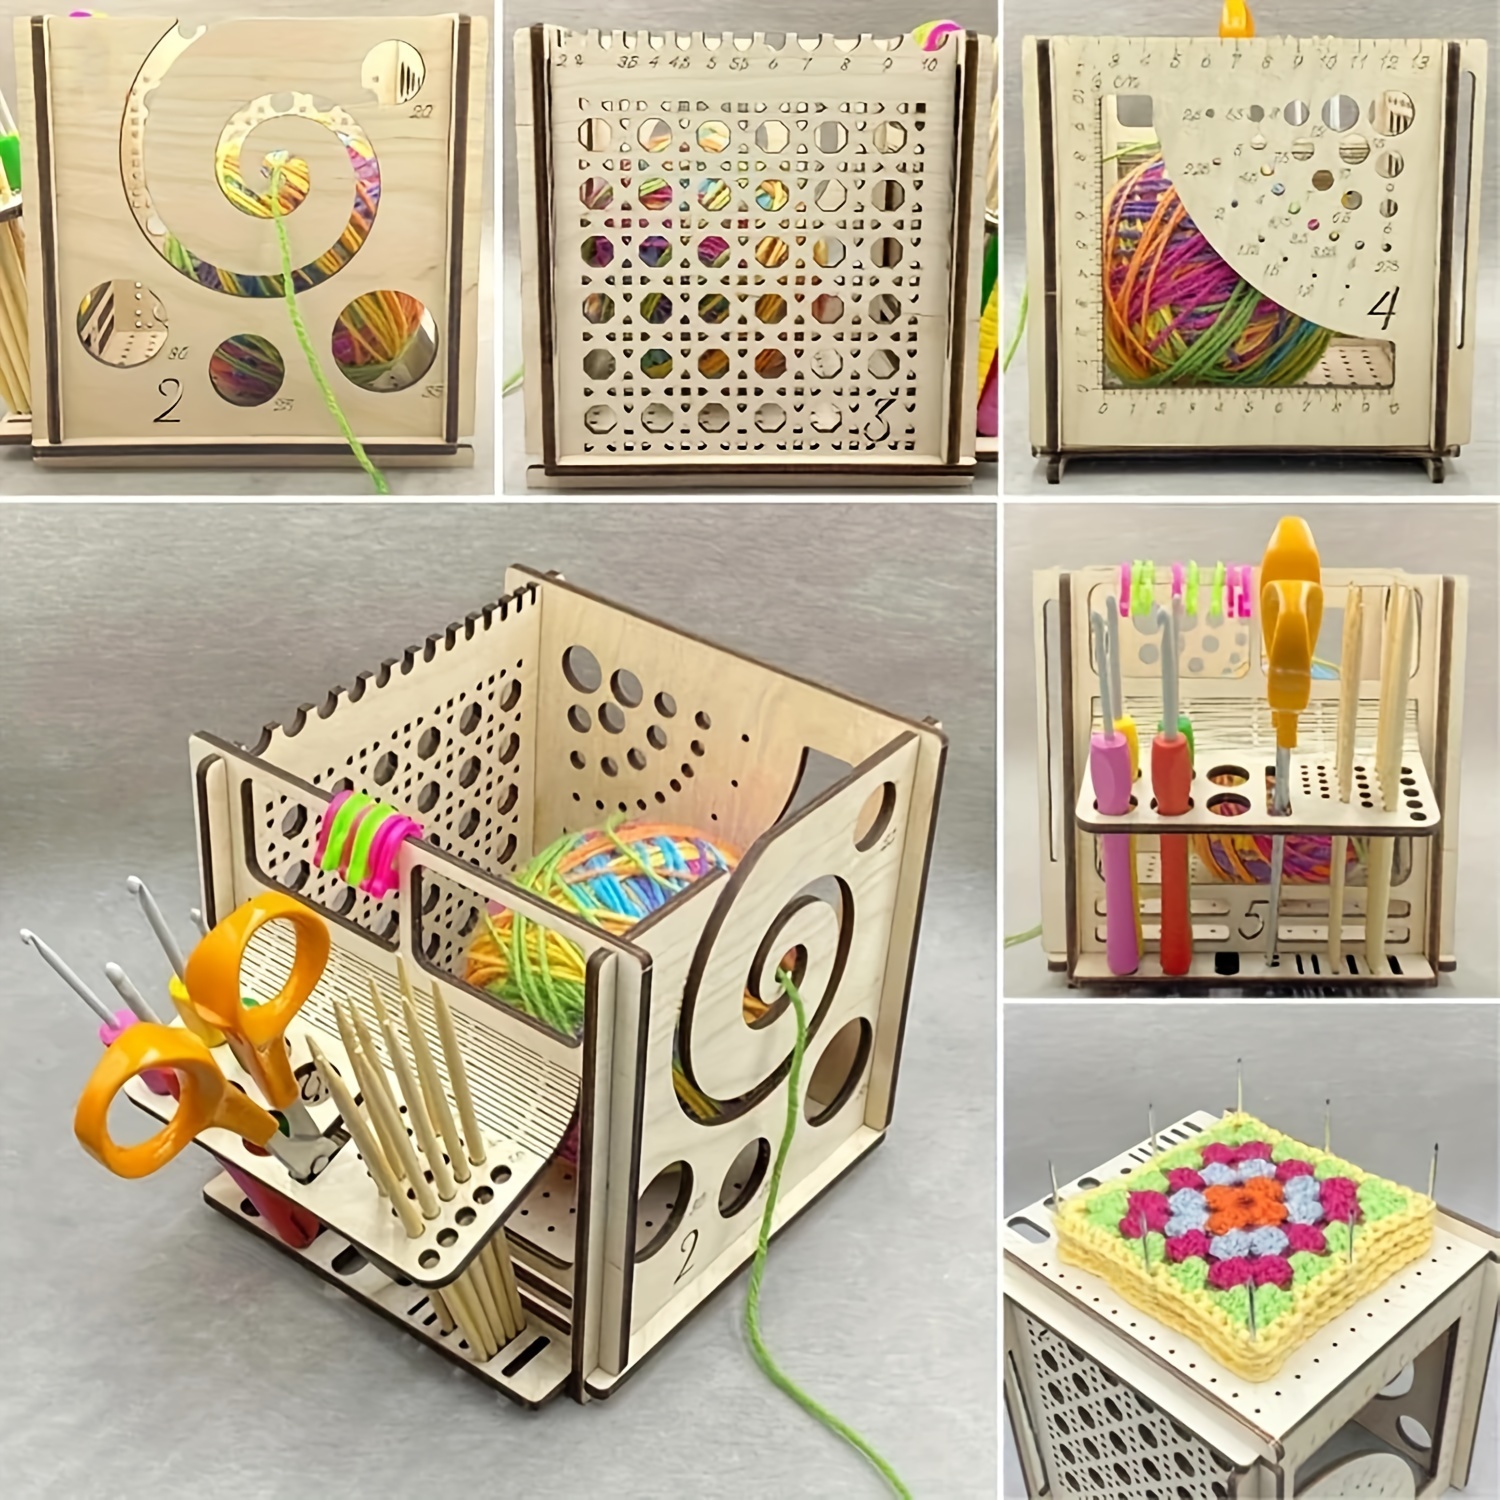 

2024 Multi-functional Knitting Tool Set, A Versatile Wooden Yarn Bowl, Perfect For Knitting And Crochet Enthusiasts. It Includes A Yarn Organizer And Storage Container.